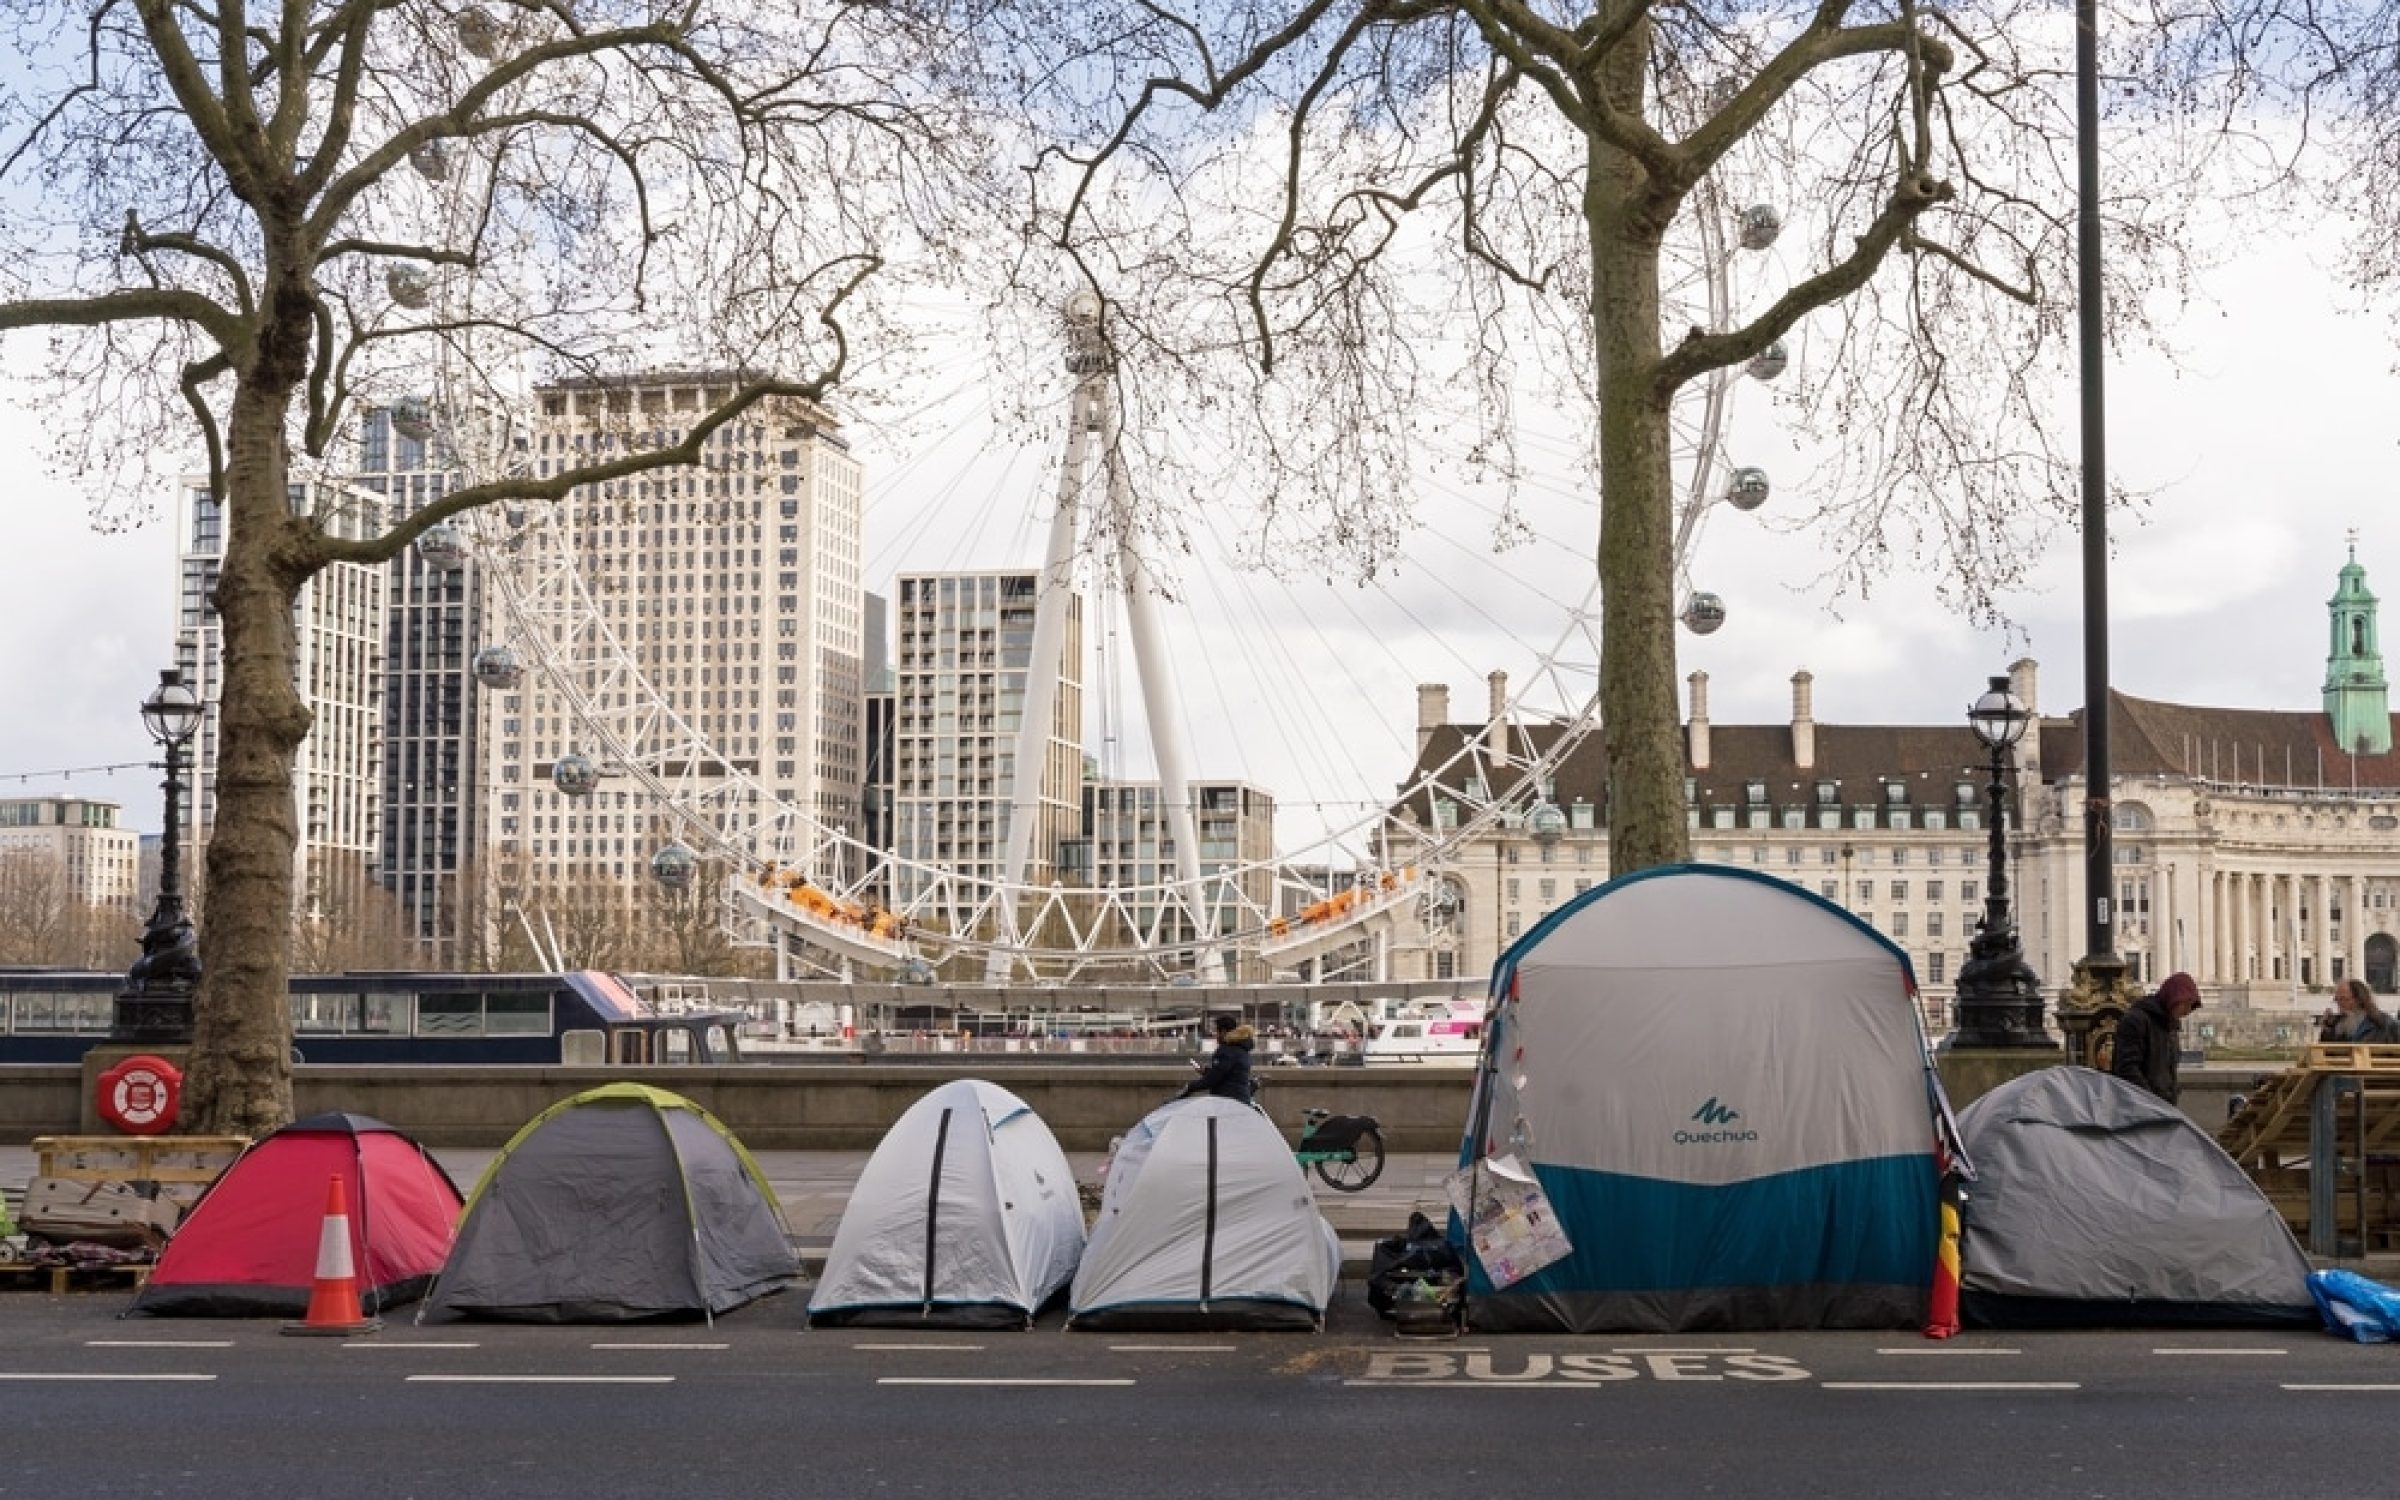 Homeslessness, tents by Victoria embankment, London